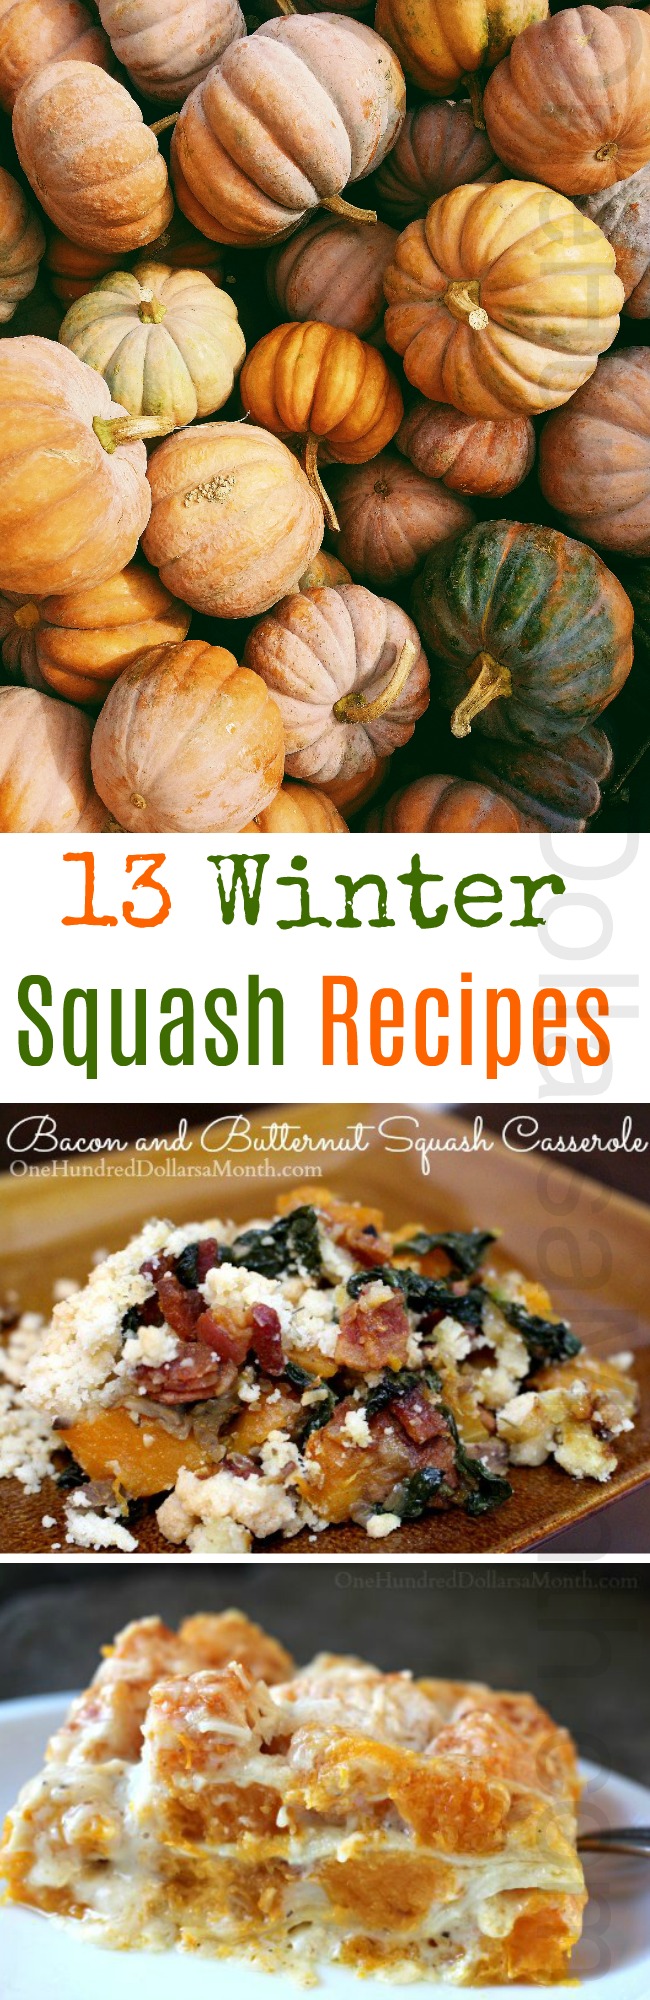 13 Winter Squash Recipes to Serve This Fall